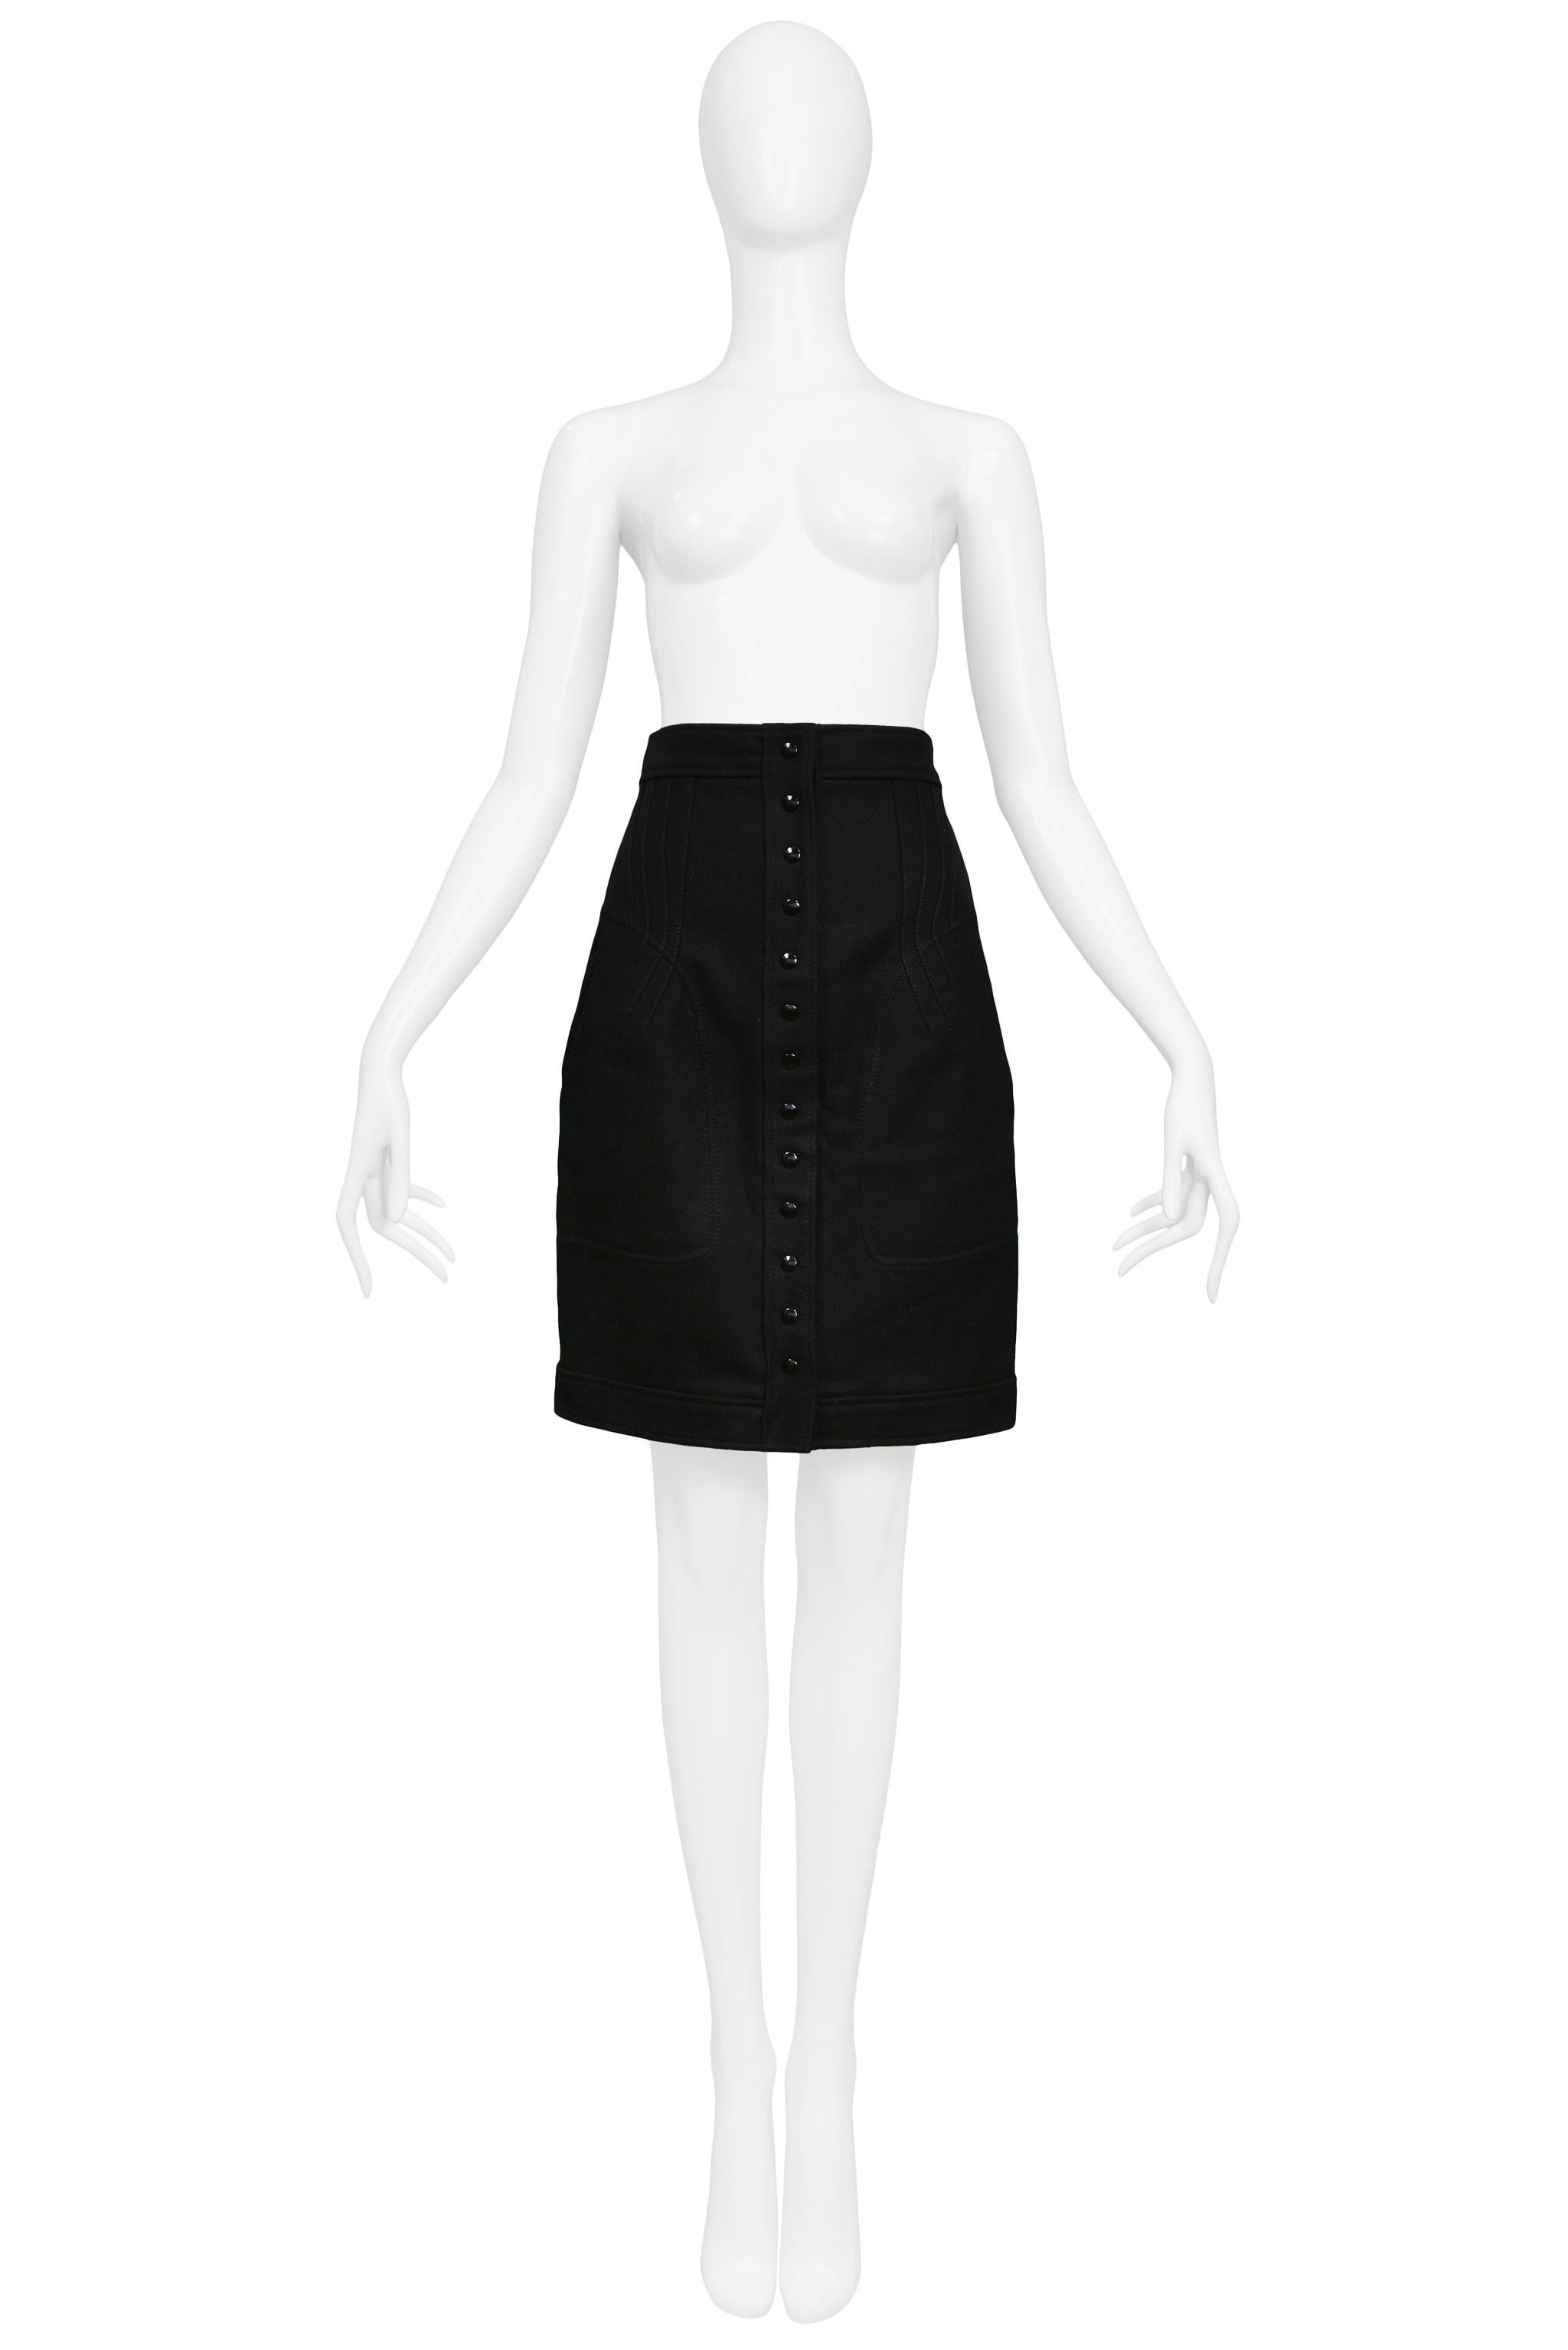 Resurrection is pleased to offer a vintage Balenciaga by Nicolas Ghesquiere black wool pencil skirt featuring a structured waistband, center front snaps, dramatic front and back darts and seaming, side pockets, and flat back. 

Balenciaga